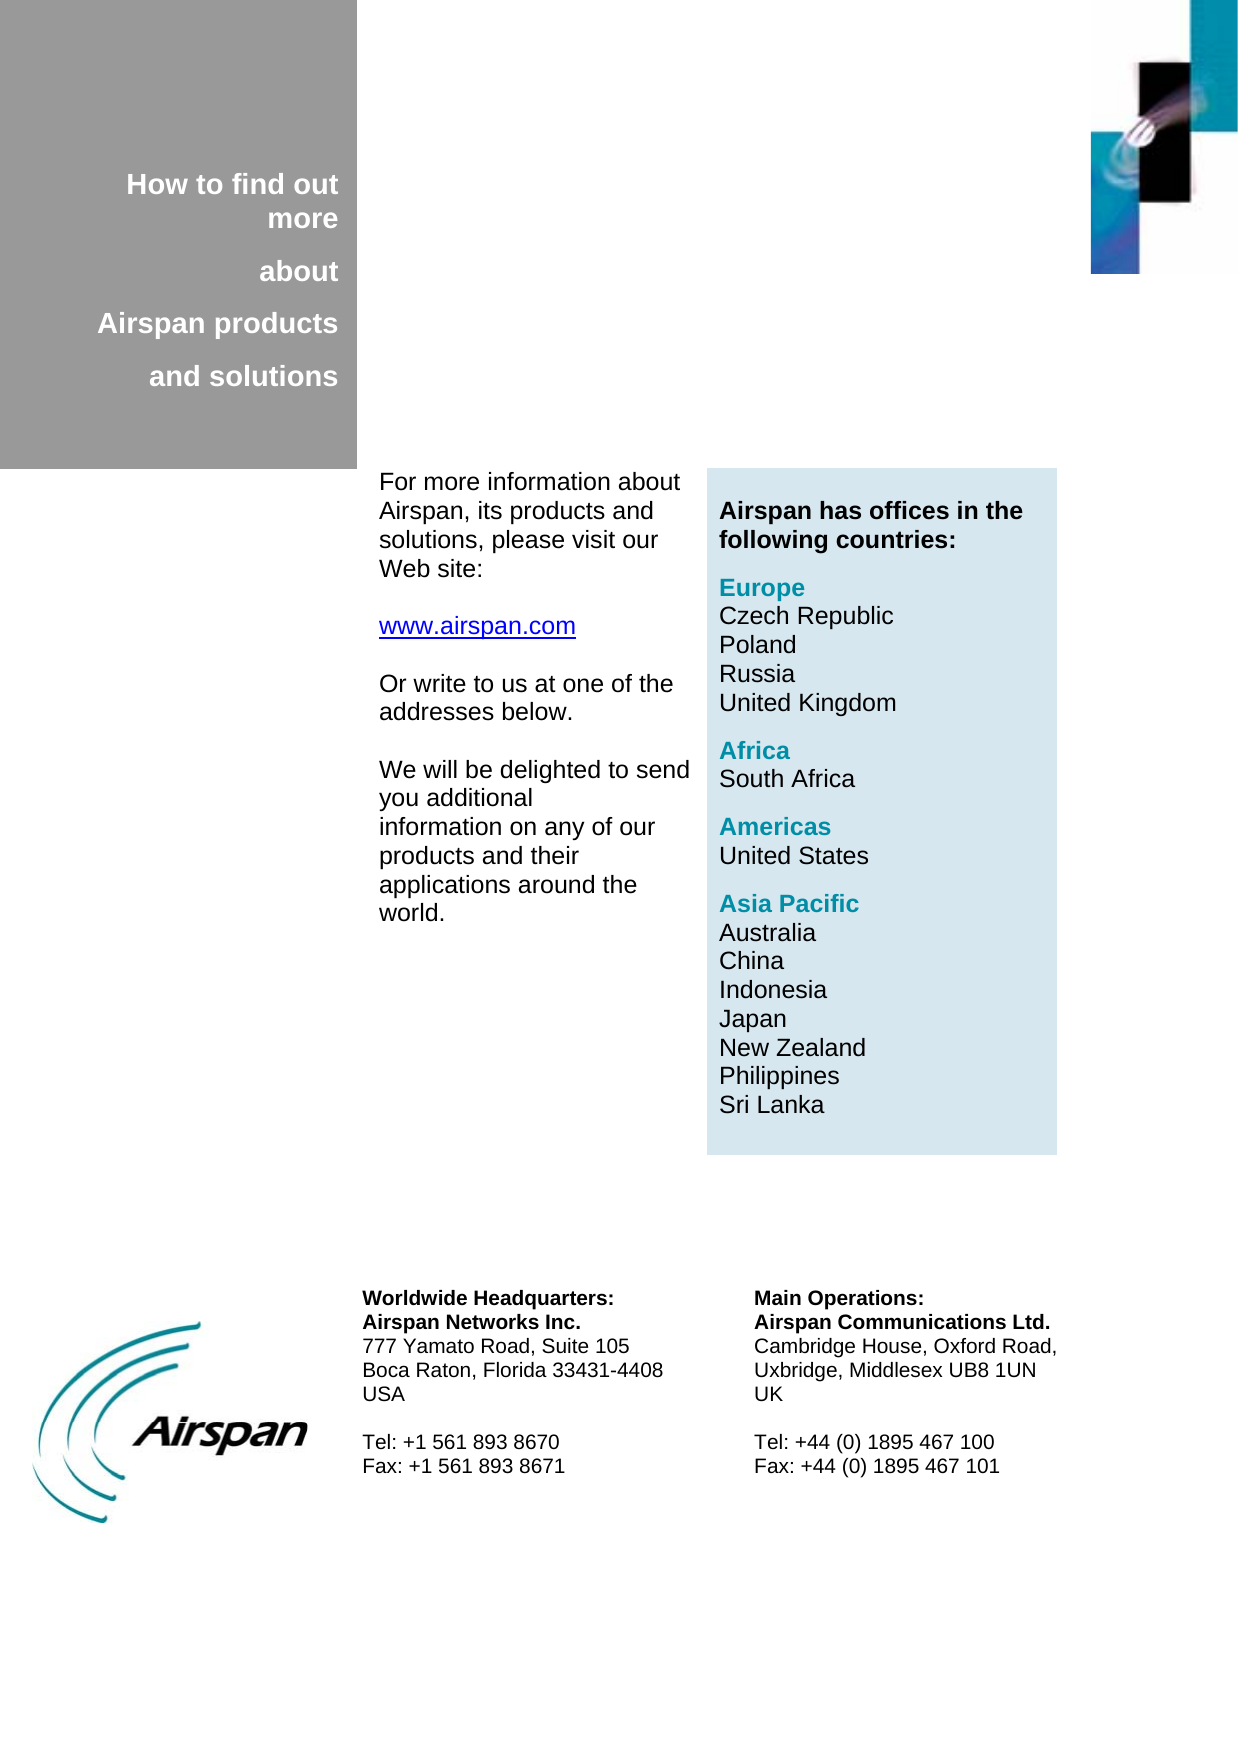             How to find out more  about  Airspan products  and solutions    Airspan has offices in the following countries:  Europe Czech Republic Poland Russia United Kingdom  Africa South Africa  Americas United States  Asia Pacific Australia China Indonesia Japan New Zealand Philippines Sri Lanka For more information about Airspan, its products and solutions, please visit our Web site:  www.airspan.com  Or write to us at one of the addresses below.  We will be delighted to send you additional information on any of our products and their applications around the world.  Worldwide Headquarters: Airspan Networks Inc. 777 Yamato Road, Suite 105 Boca Raton, Florida 33431-4408 USA  Tel: +1 561 893 8670 Fax: +1 561 893 8671 Main Operations: Airspan Communications Ltd. Cambridge House, Oxford Road, Uxbridge, Middlesex UB8 1UN UK  Tel: +44 (0) 1895 467 100 Fax: +44 (0) 1895 467 101  